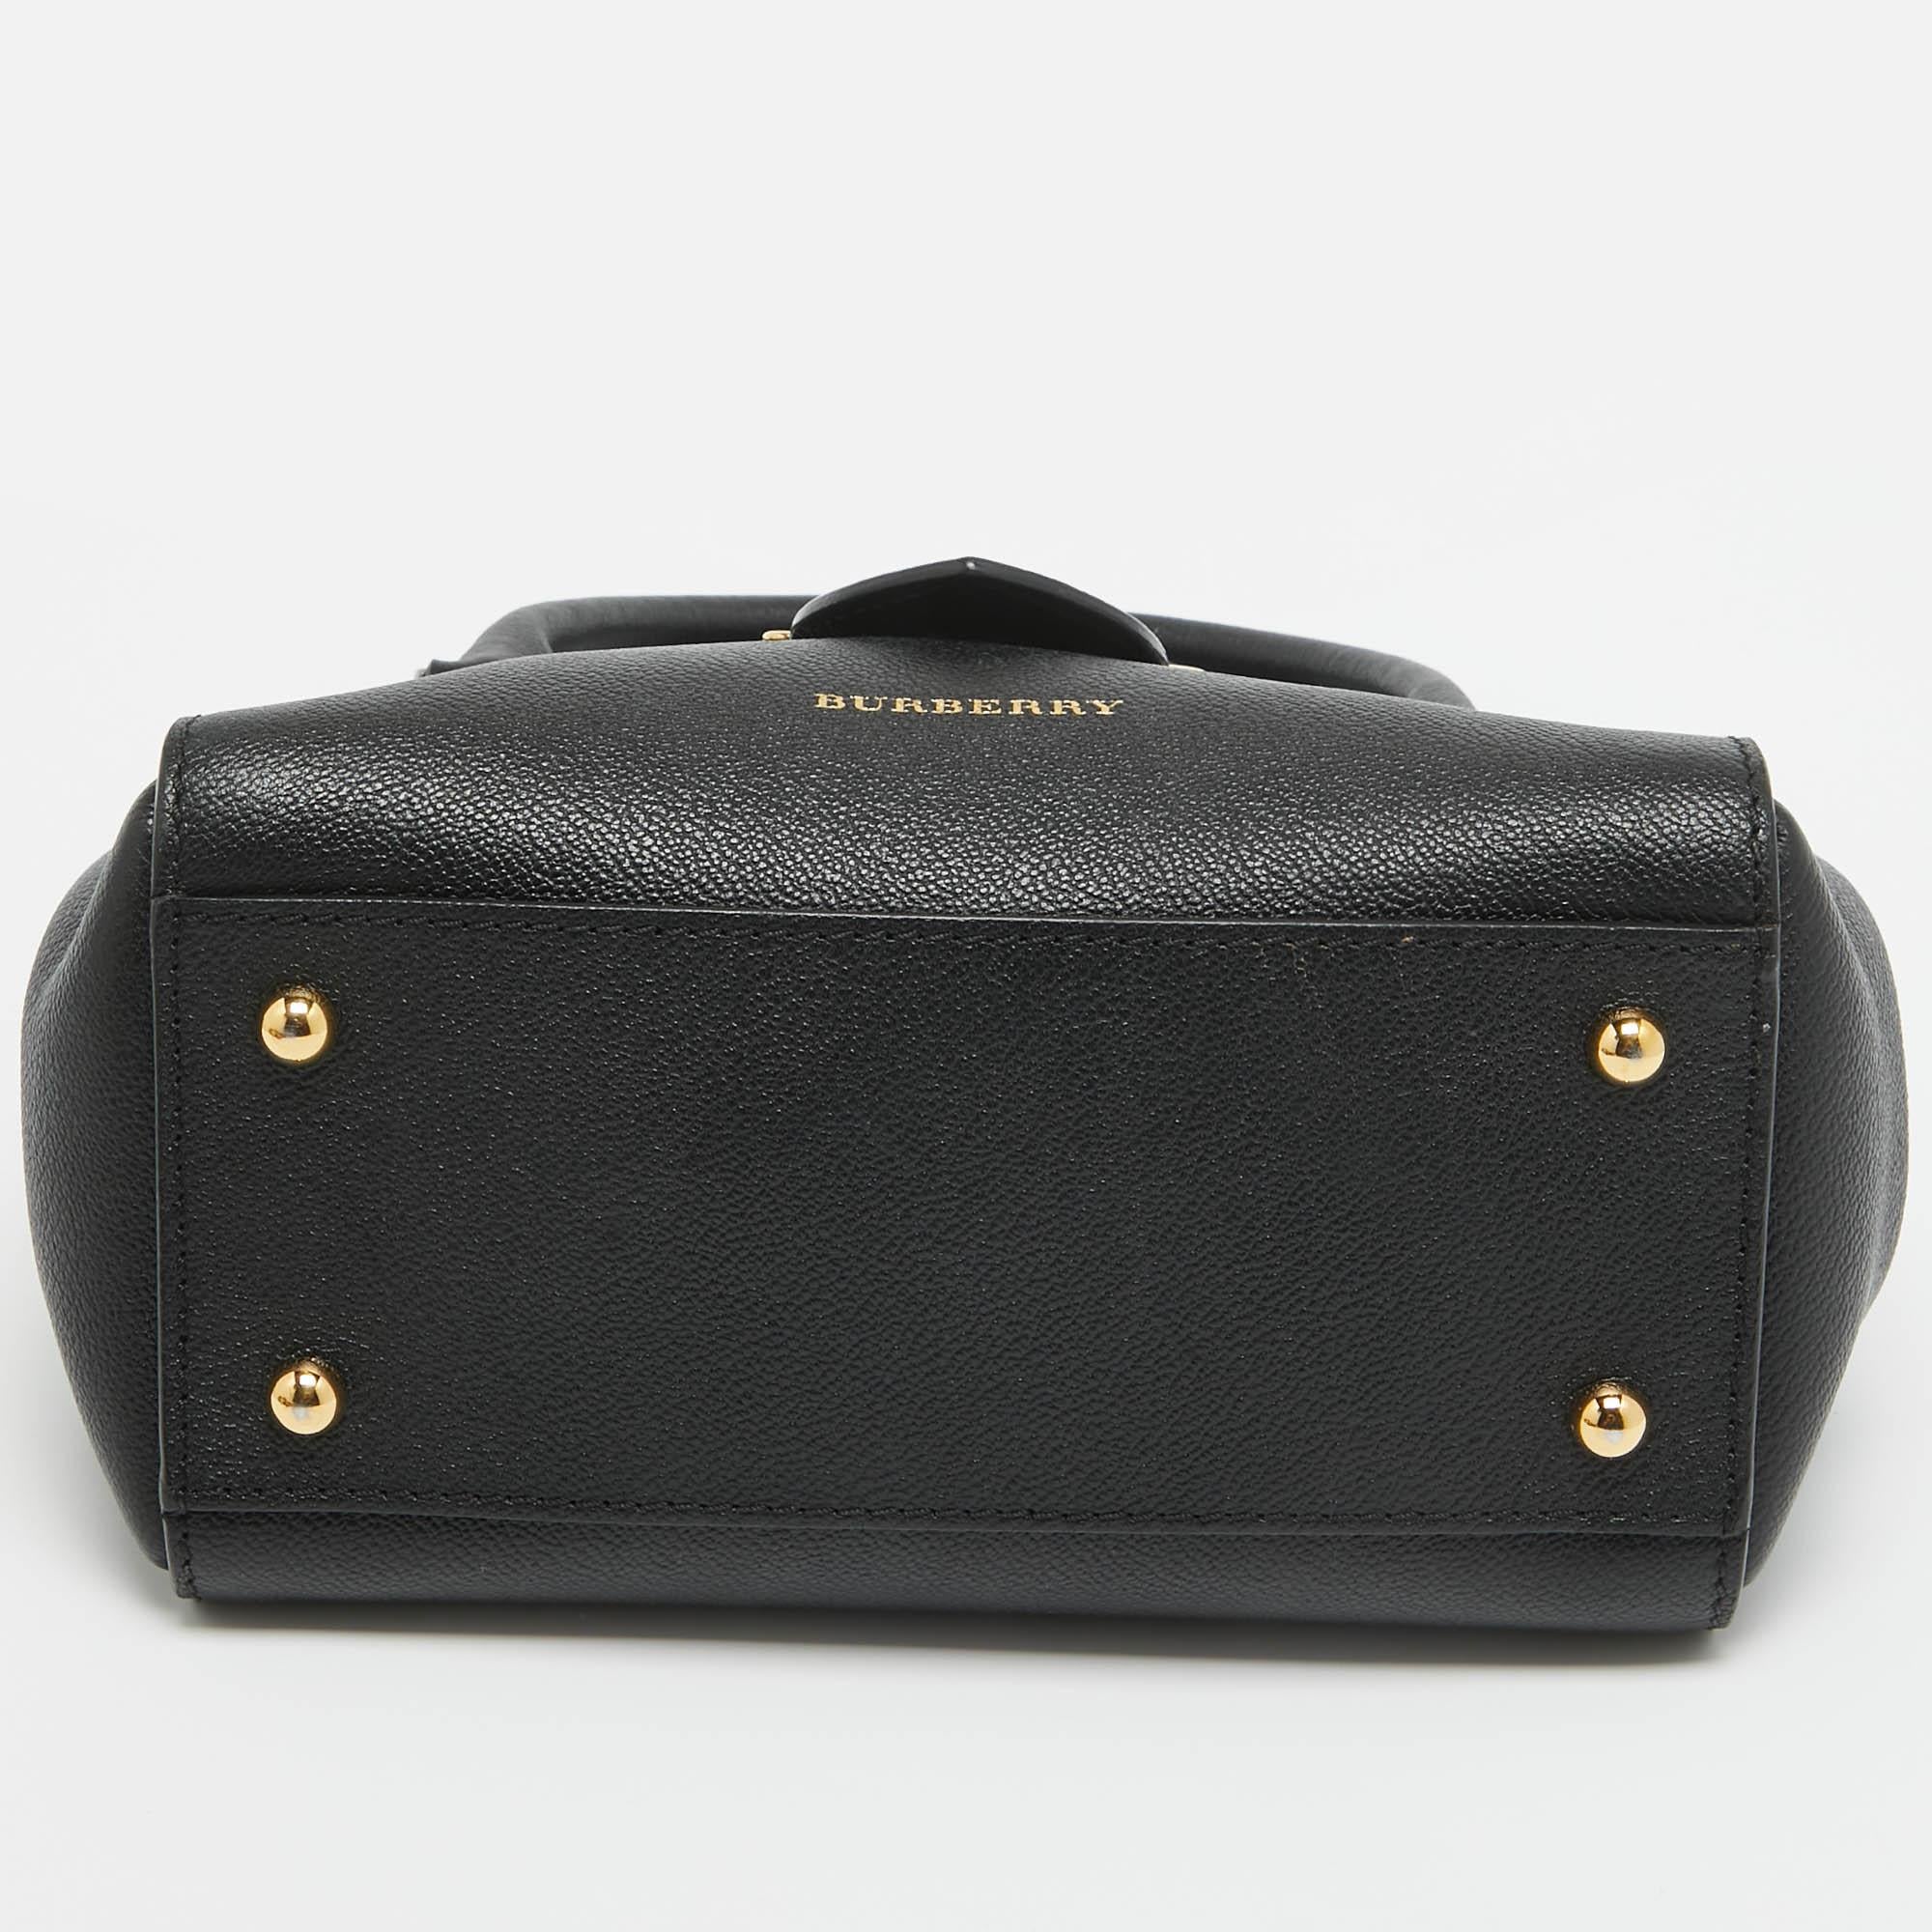 Burberry Black Leather Buckle Flap Tote For Sale 3